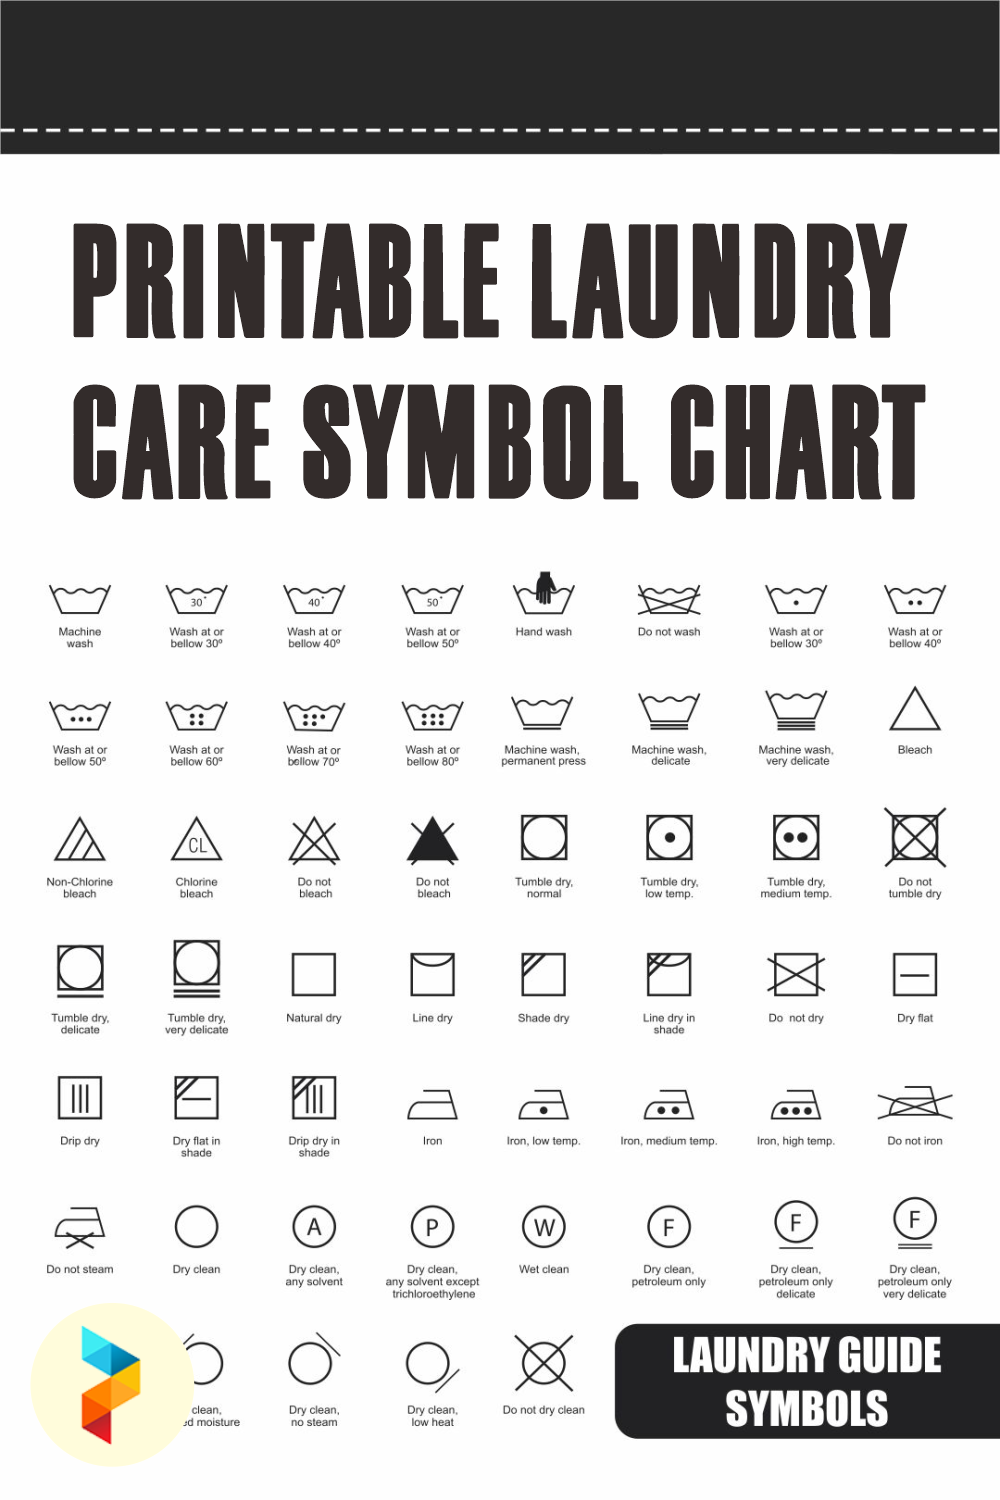 10 Best Printable Laundry Care Symbol Chart